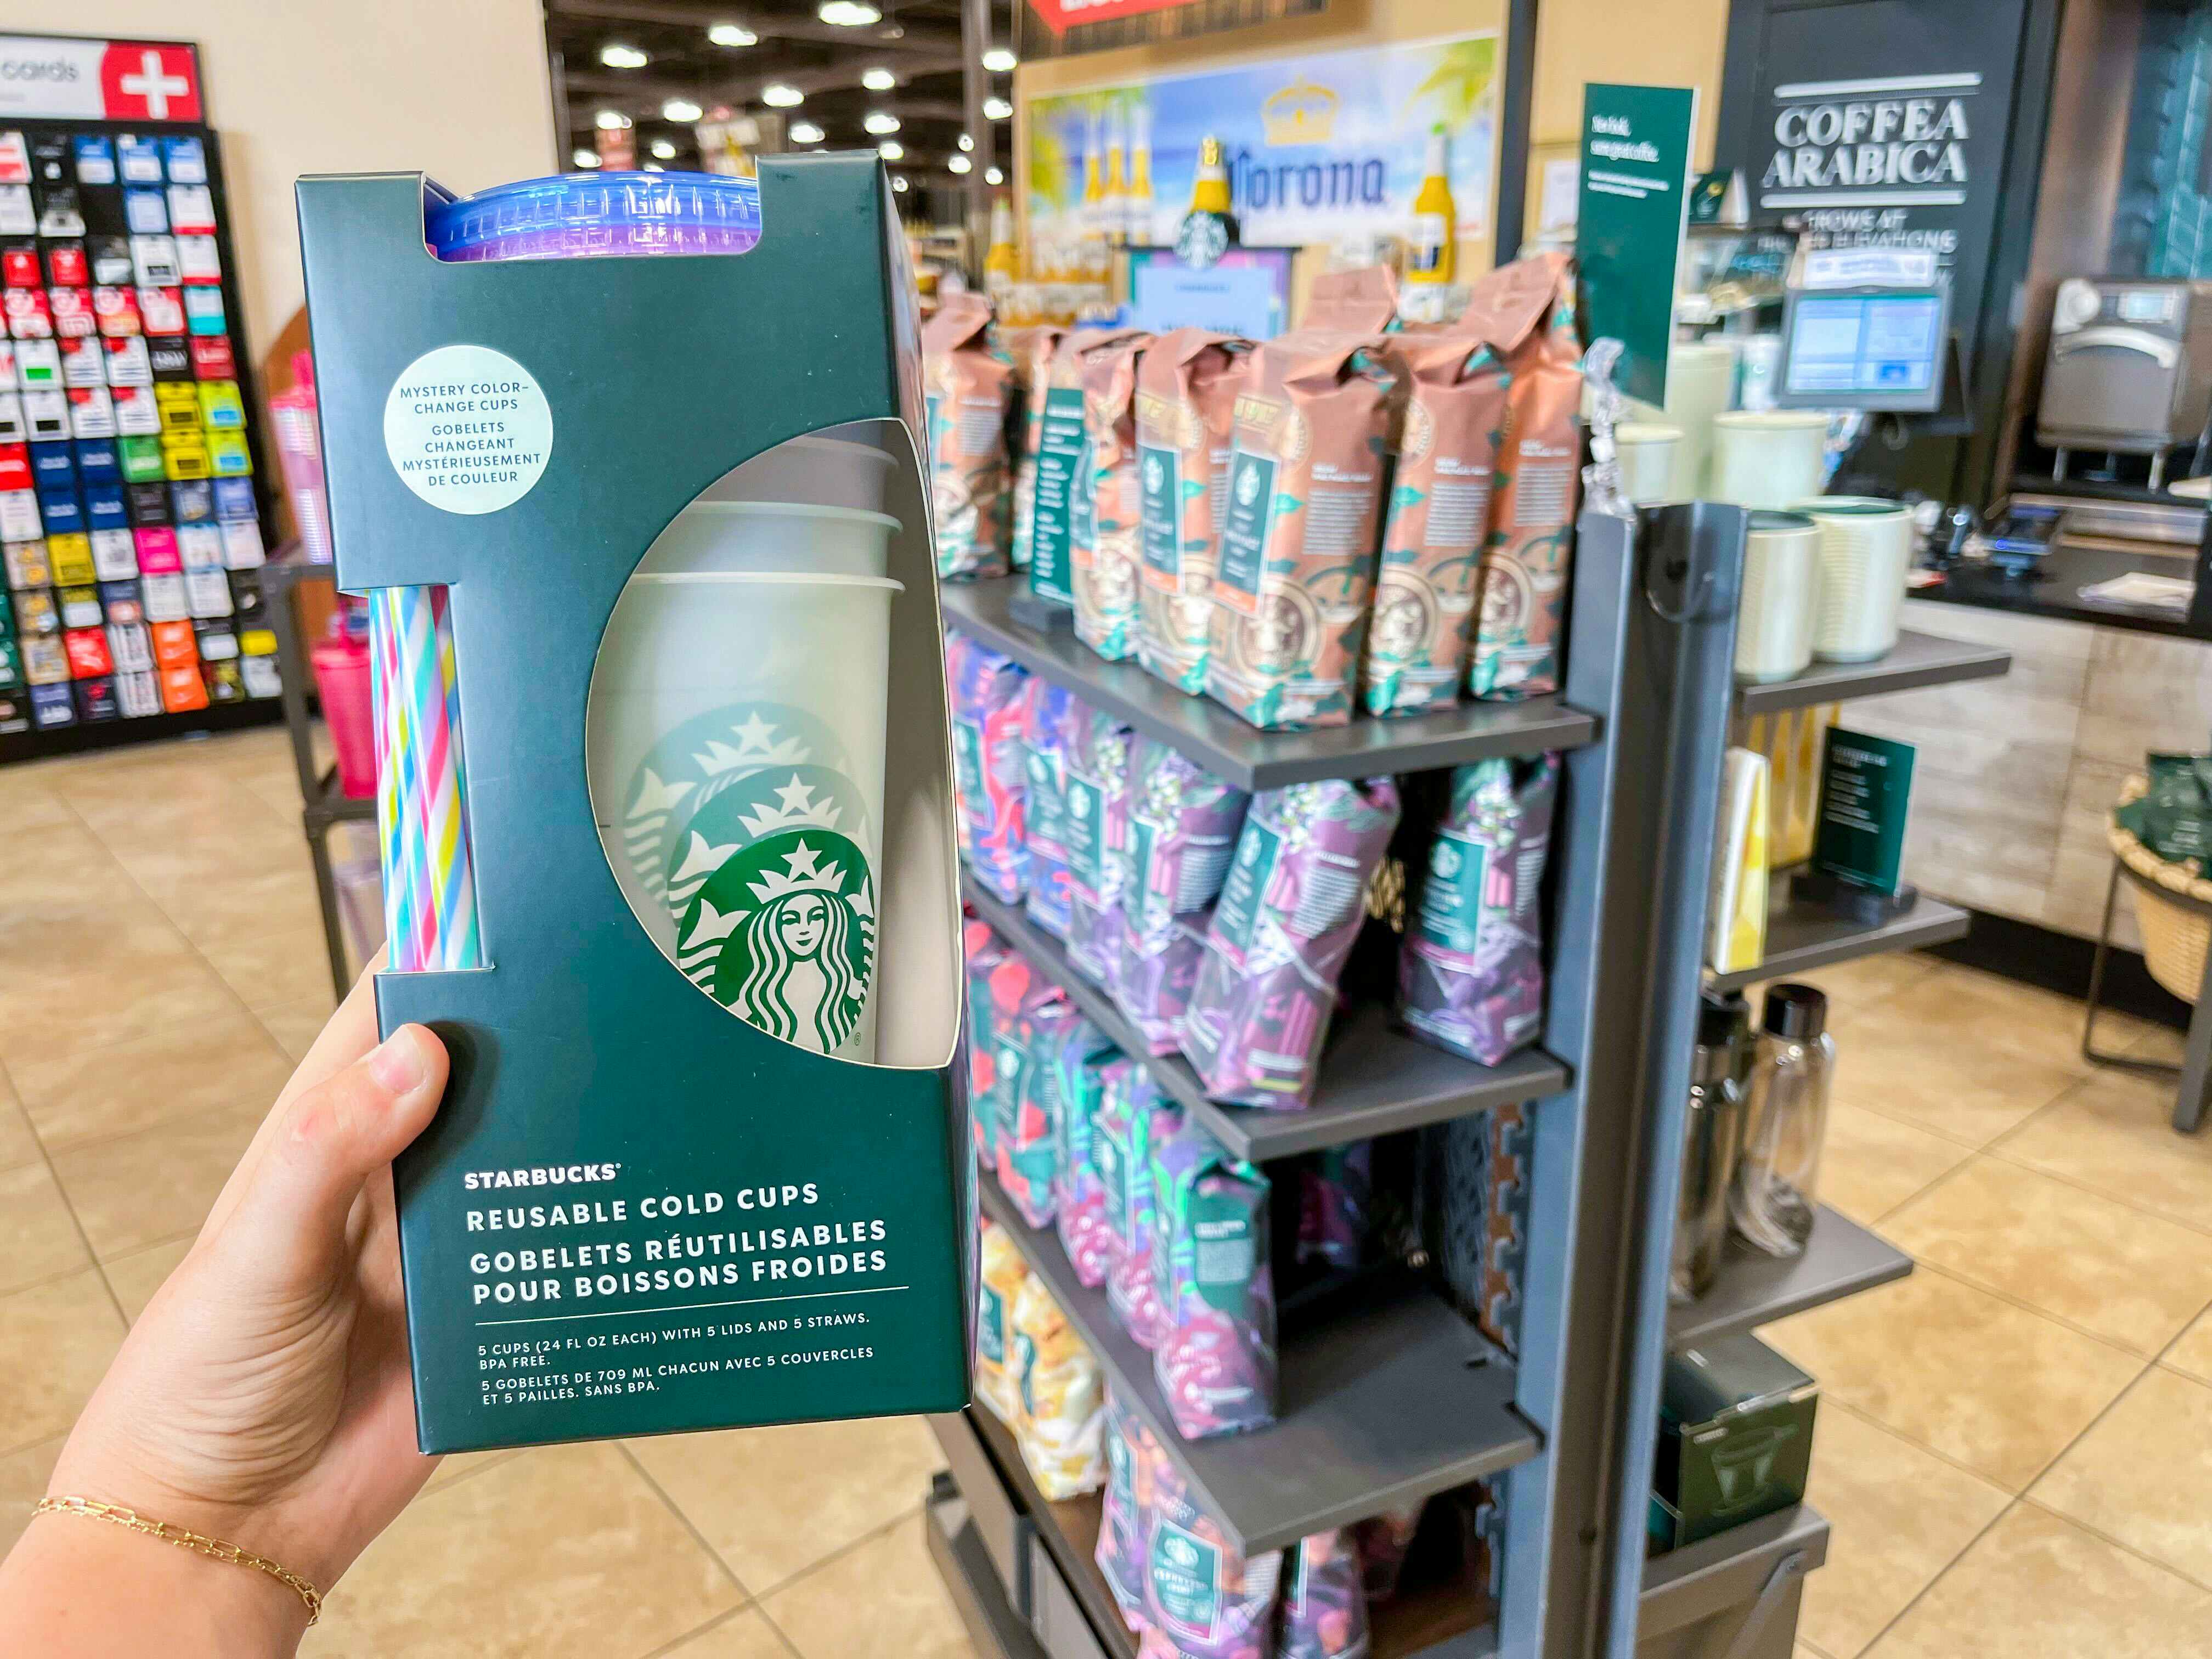 https://prod-cdn-thekrazycouponlady.imgix.net/wp-content/uploads/2023/05/starbucks-color-changing-cold-cups-hand-holding-cups-coffee-display-1684258728-1684258728.jpg?auto=format&fit=fill&q=25